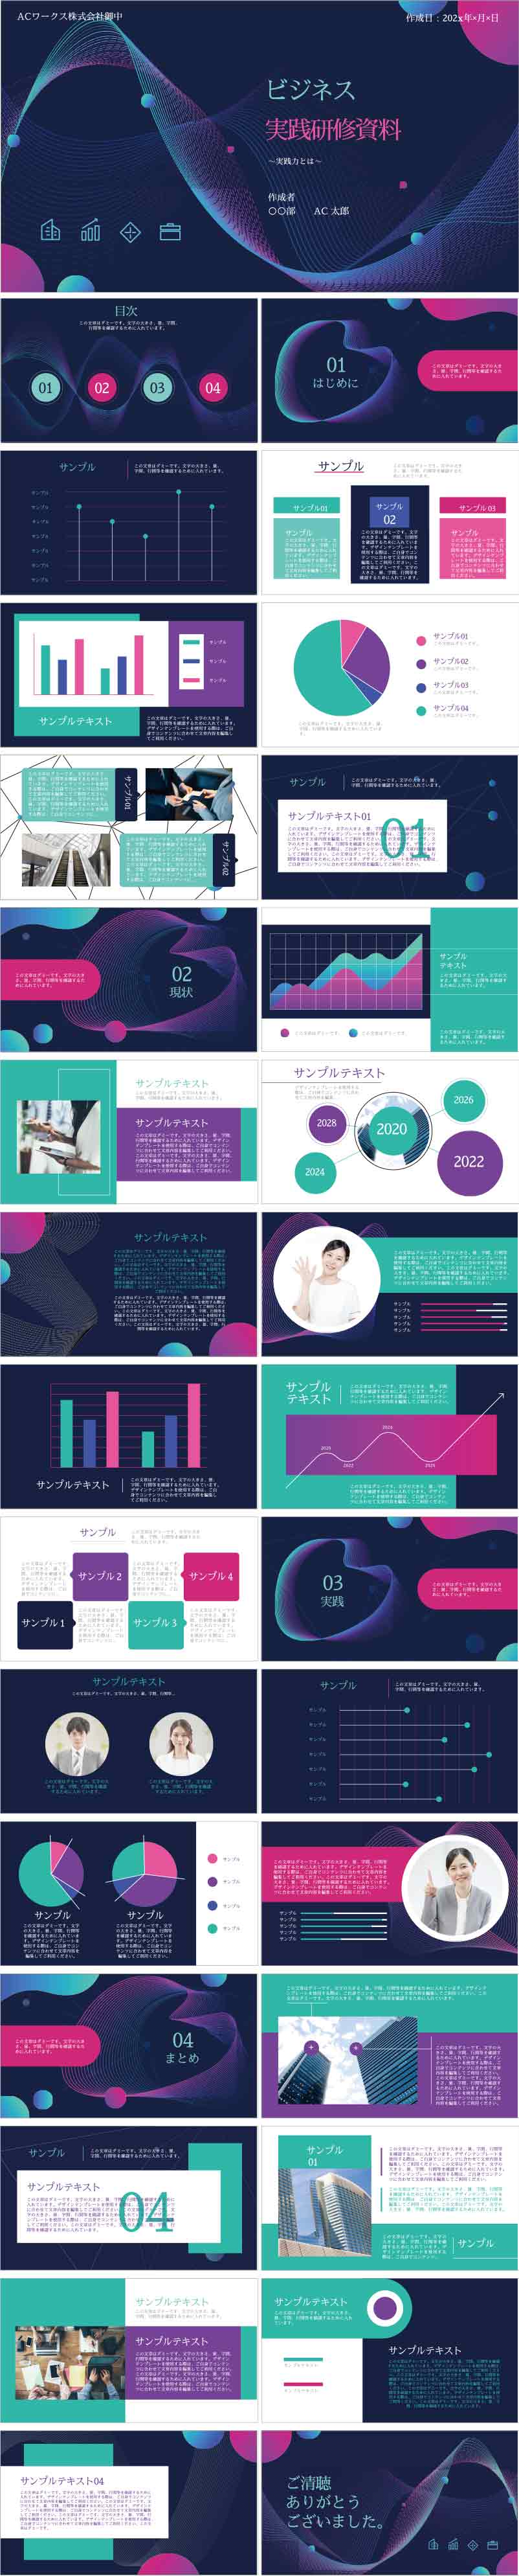 PowerPoint template vol.98